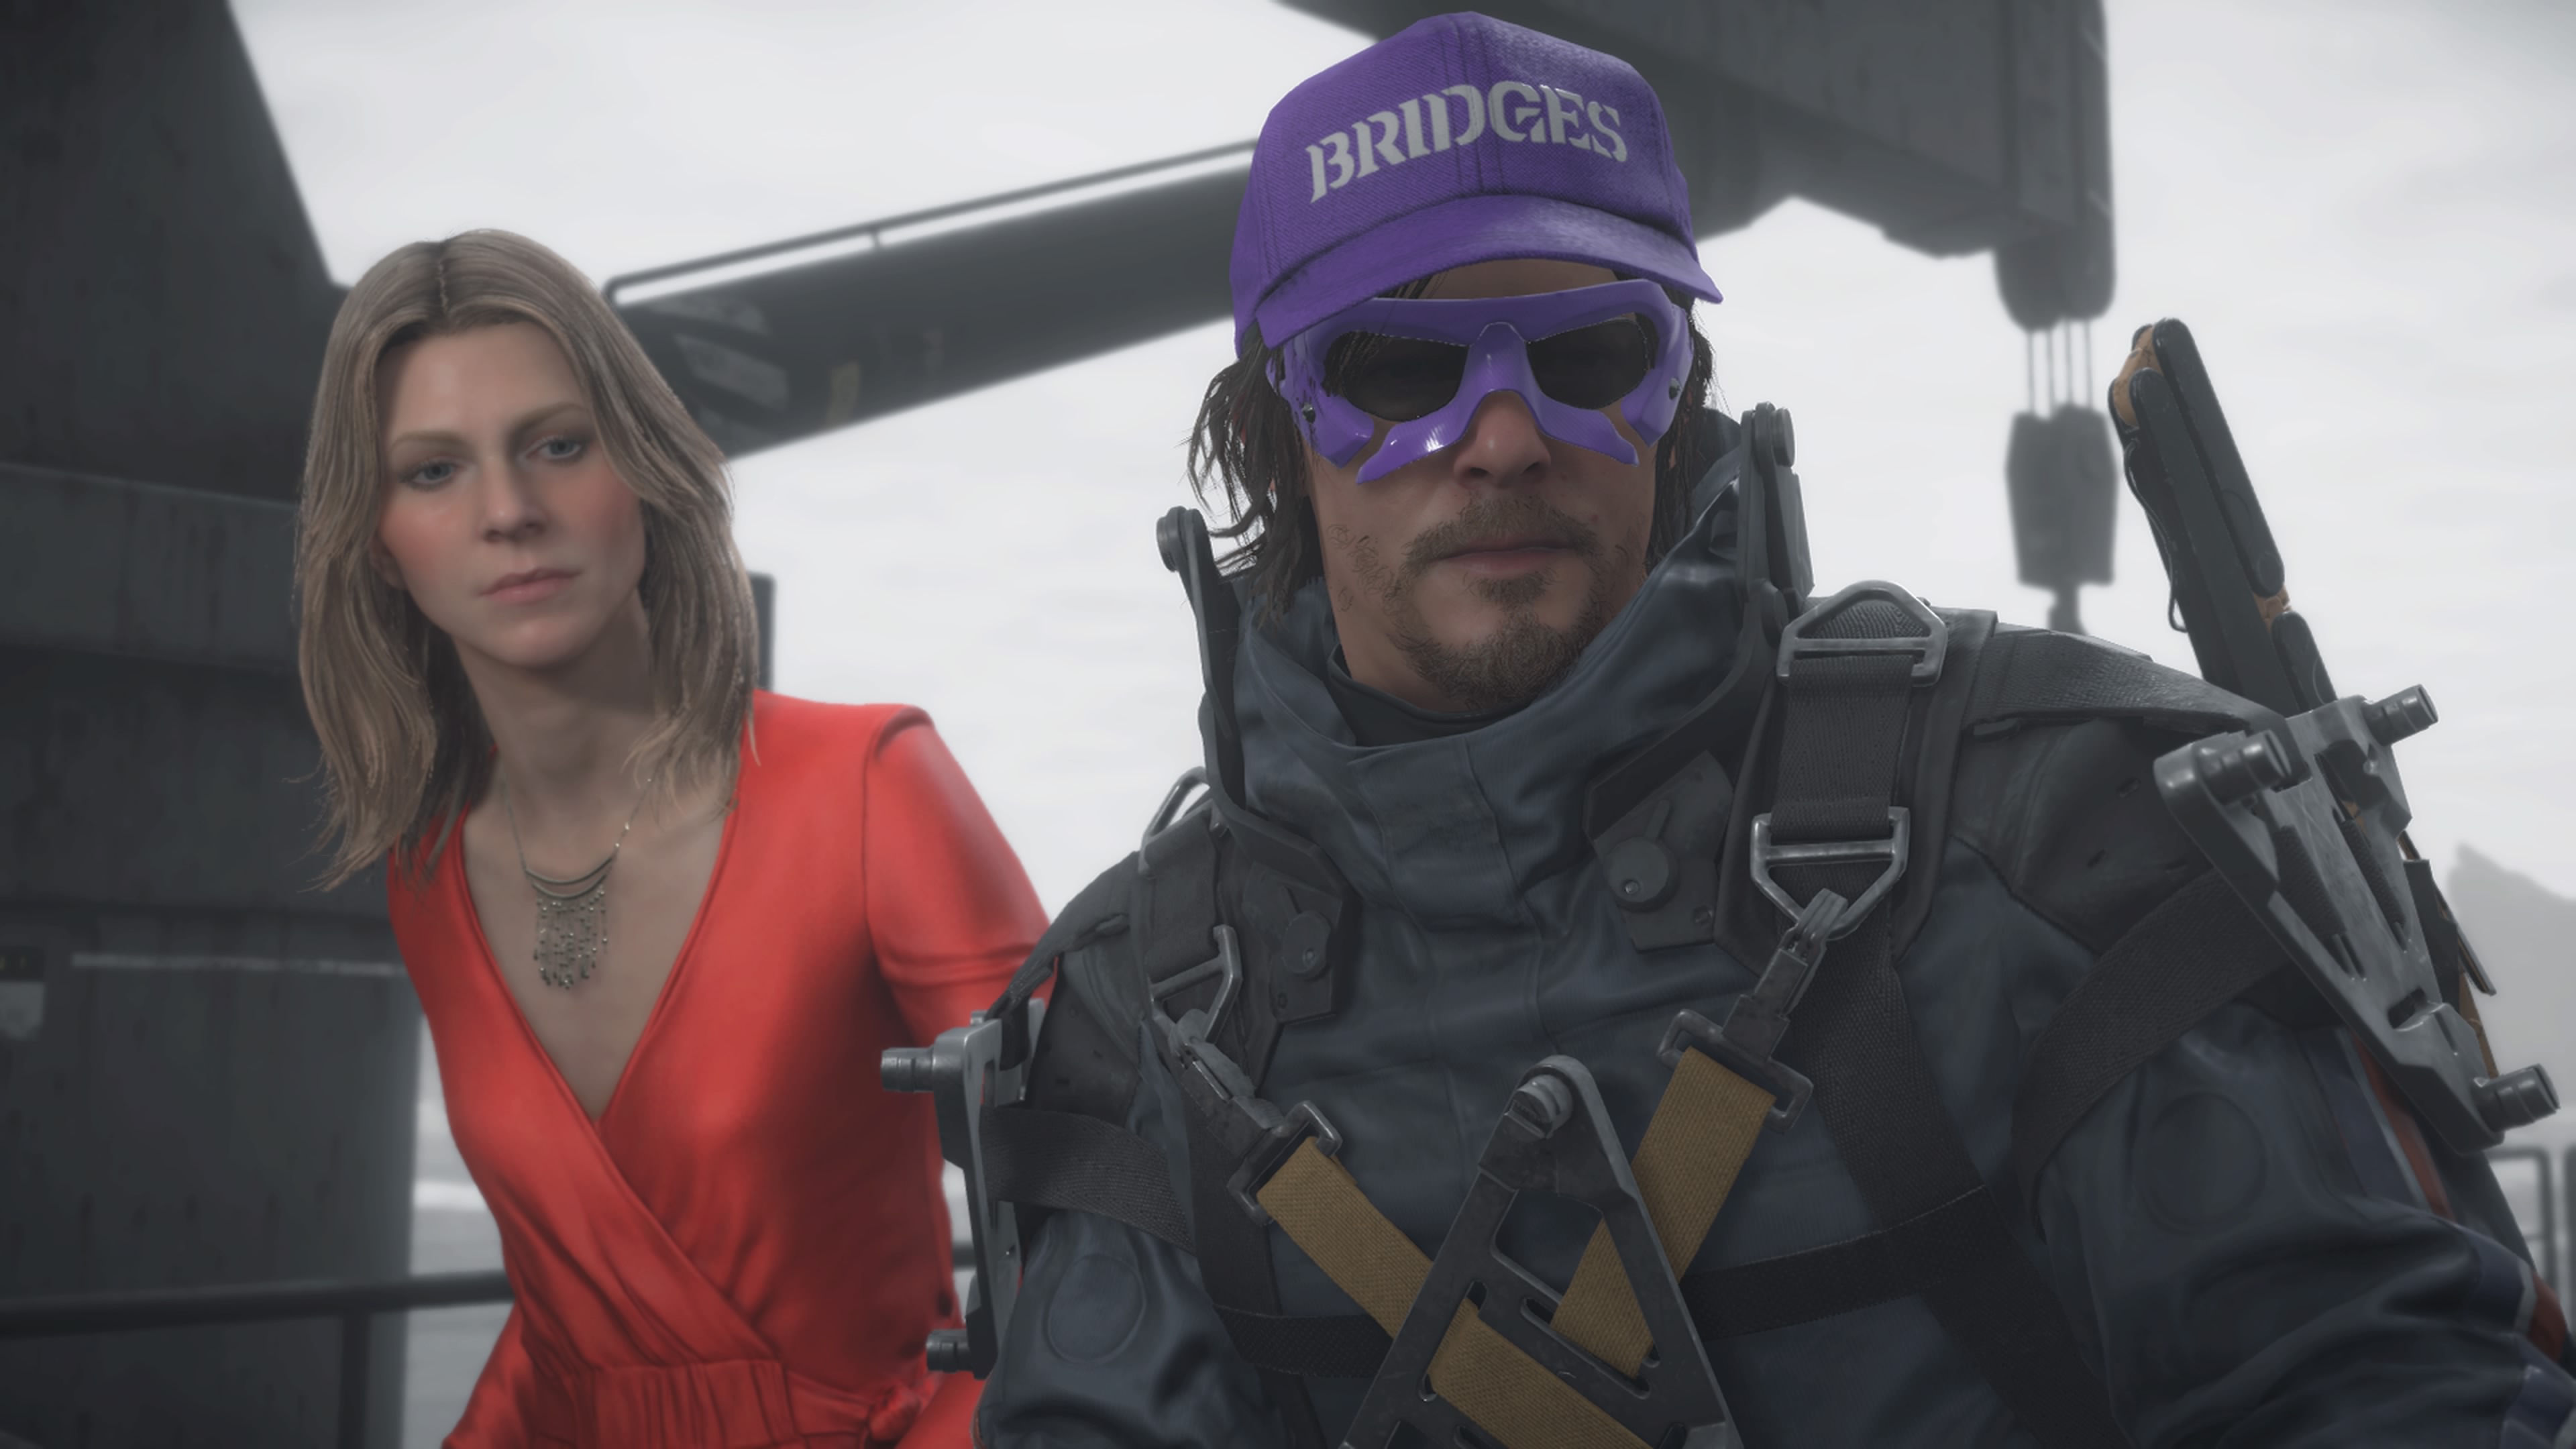 a middle-aged blond woman in a red dress standing next to a man in a futuristic spacesuit wearing a purple hat that says “BRIDGES” and purple-rimmed sunglasses, in Death Stranding